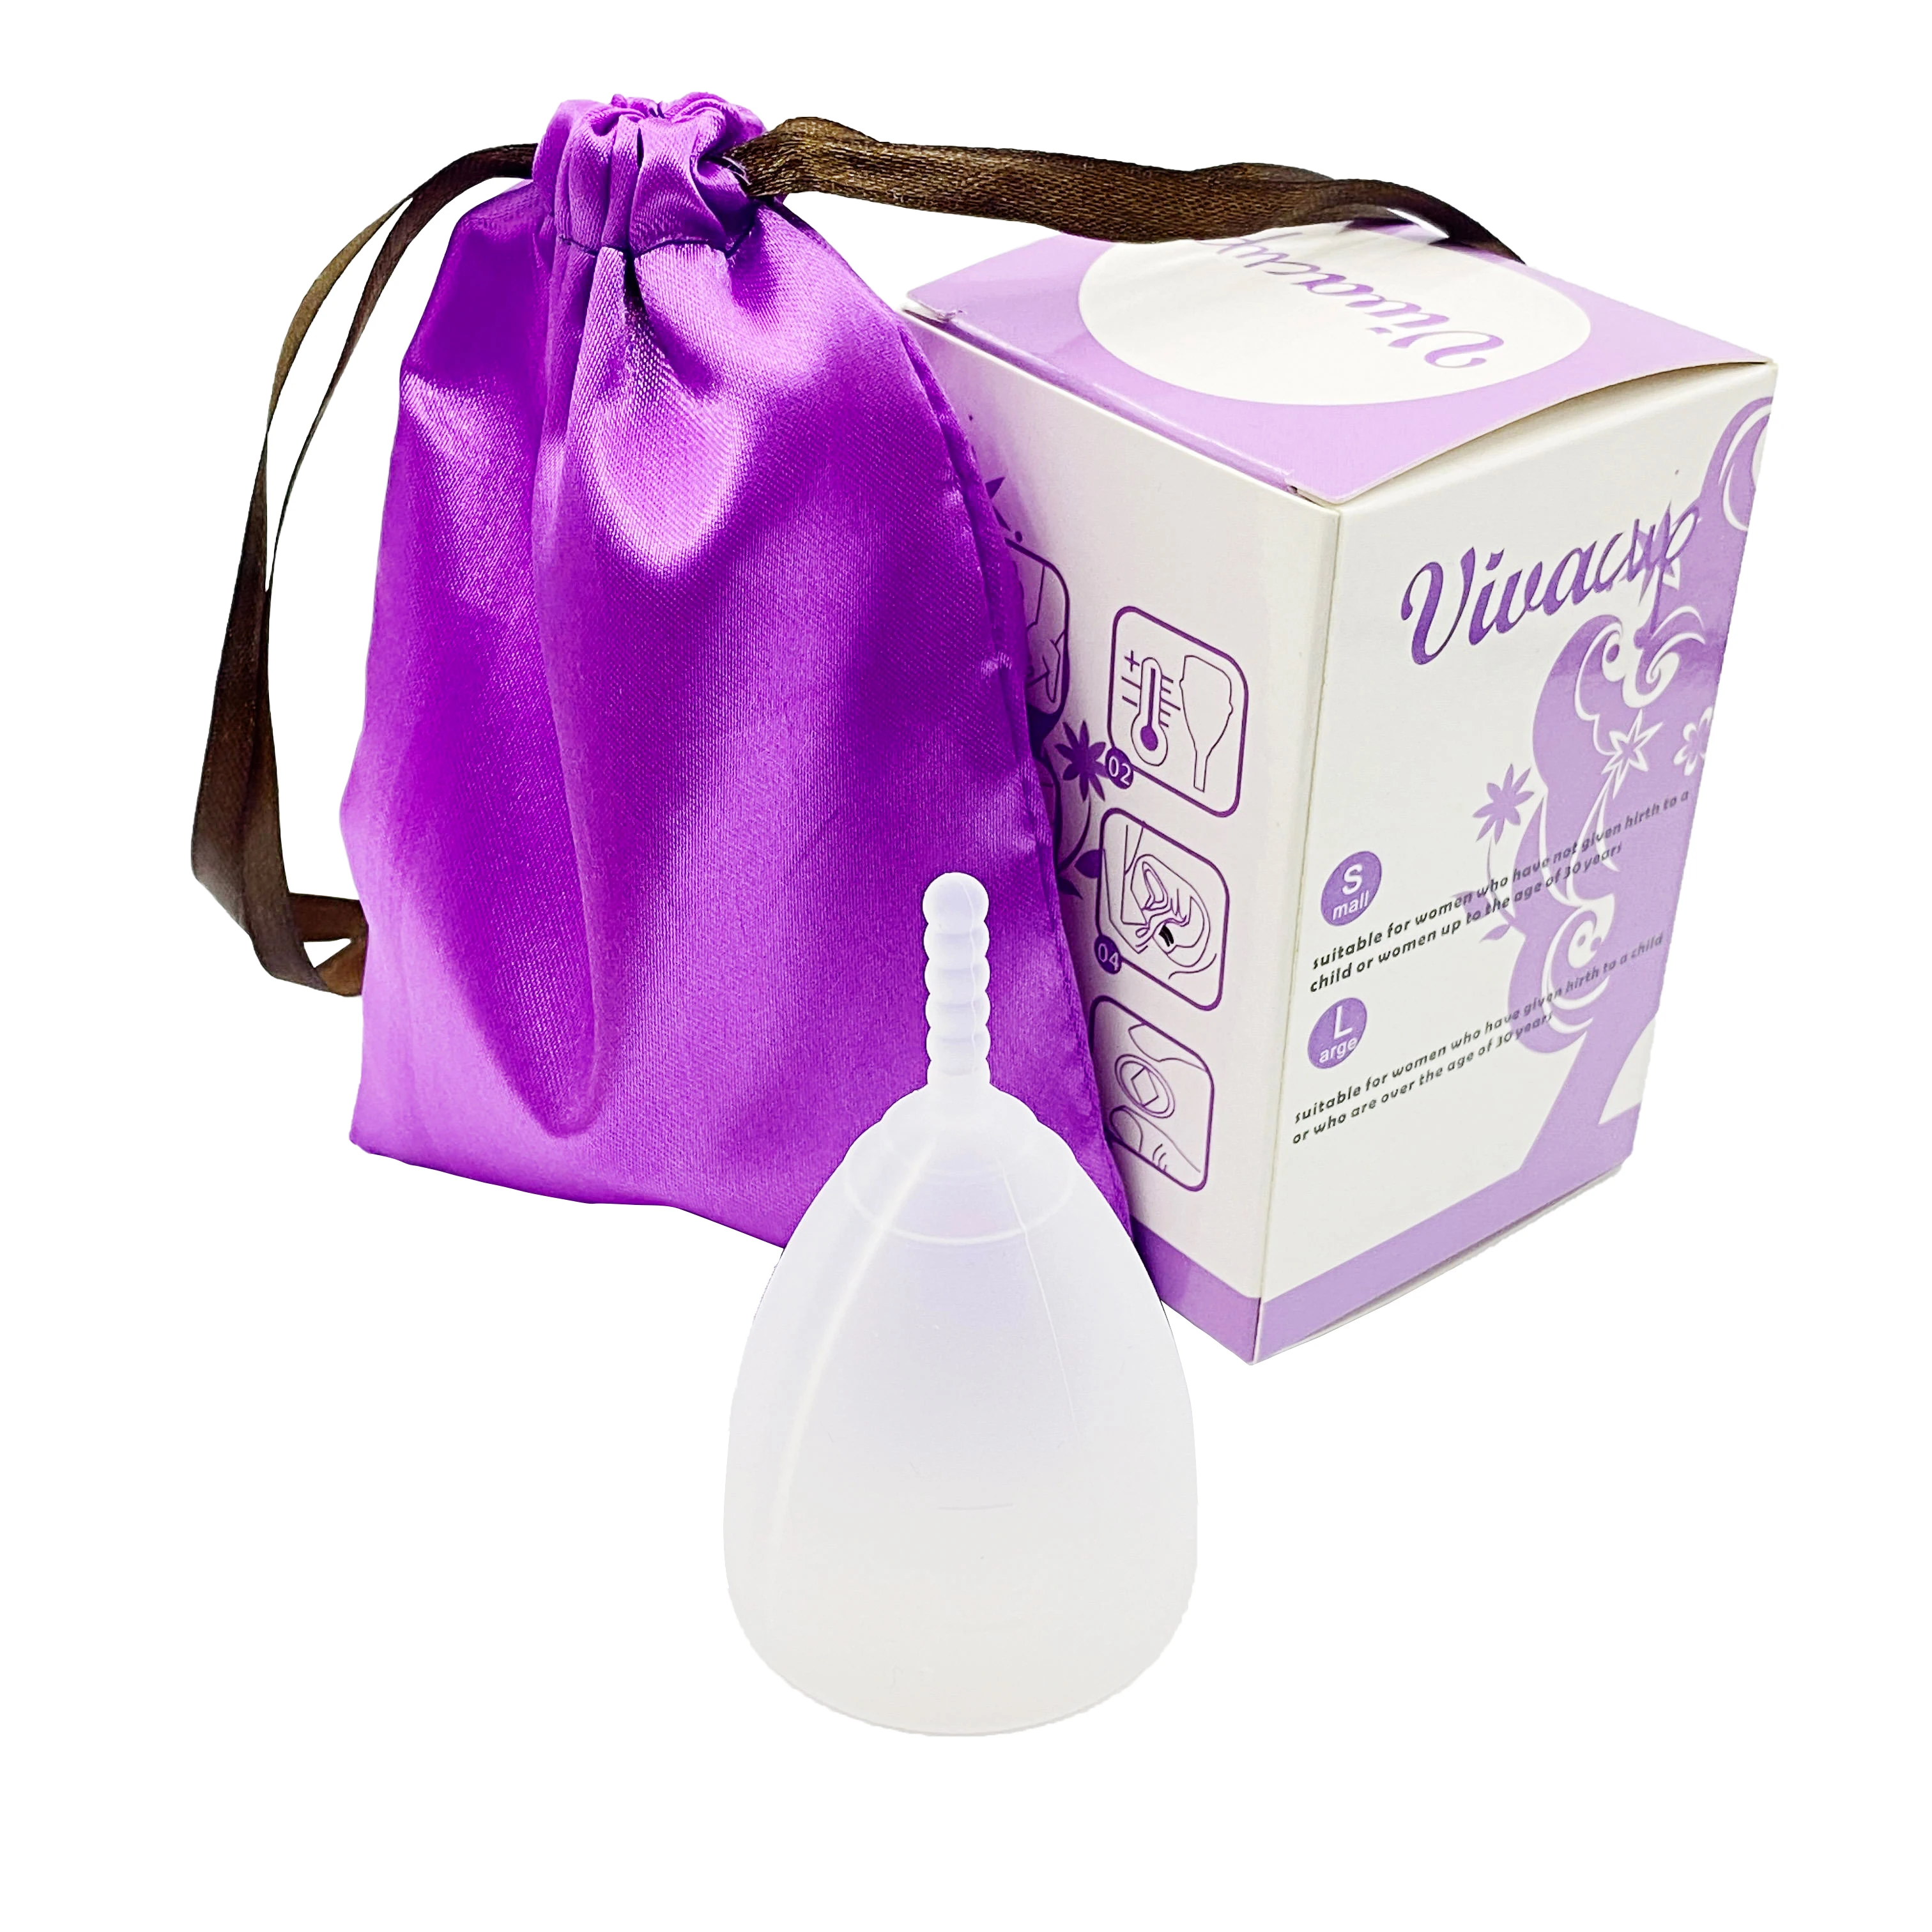 Oem 100soft Medical Silicone Menstrual Cups With Reusable Lady Menstruation Cups Buy Silicone 7652